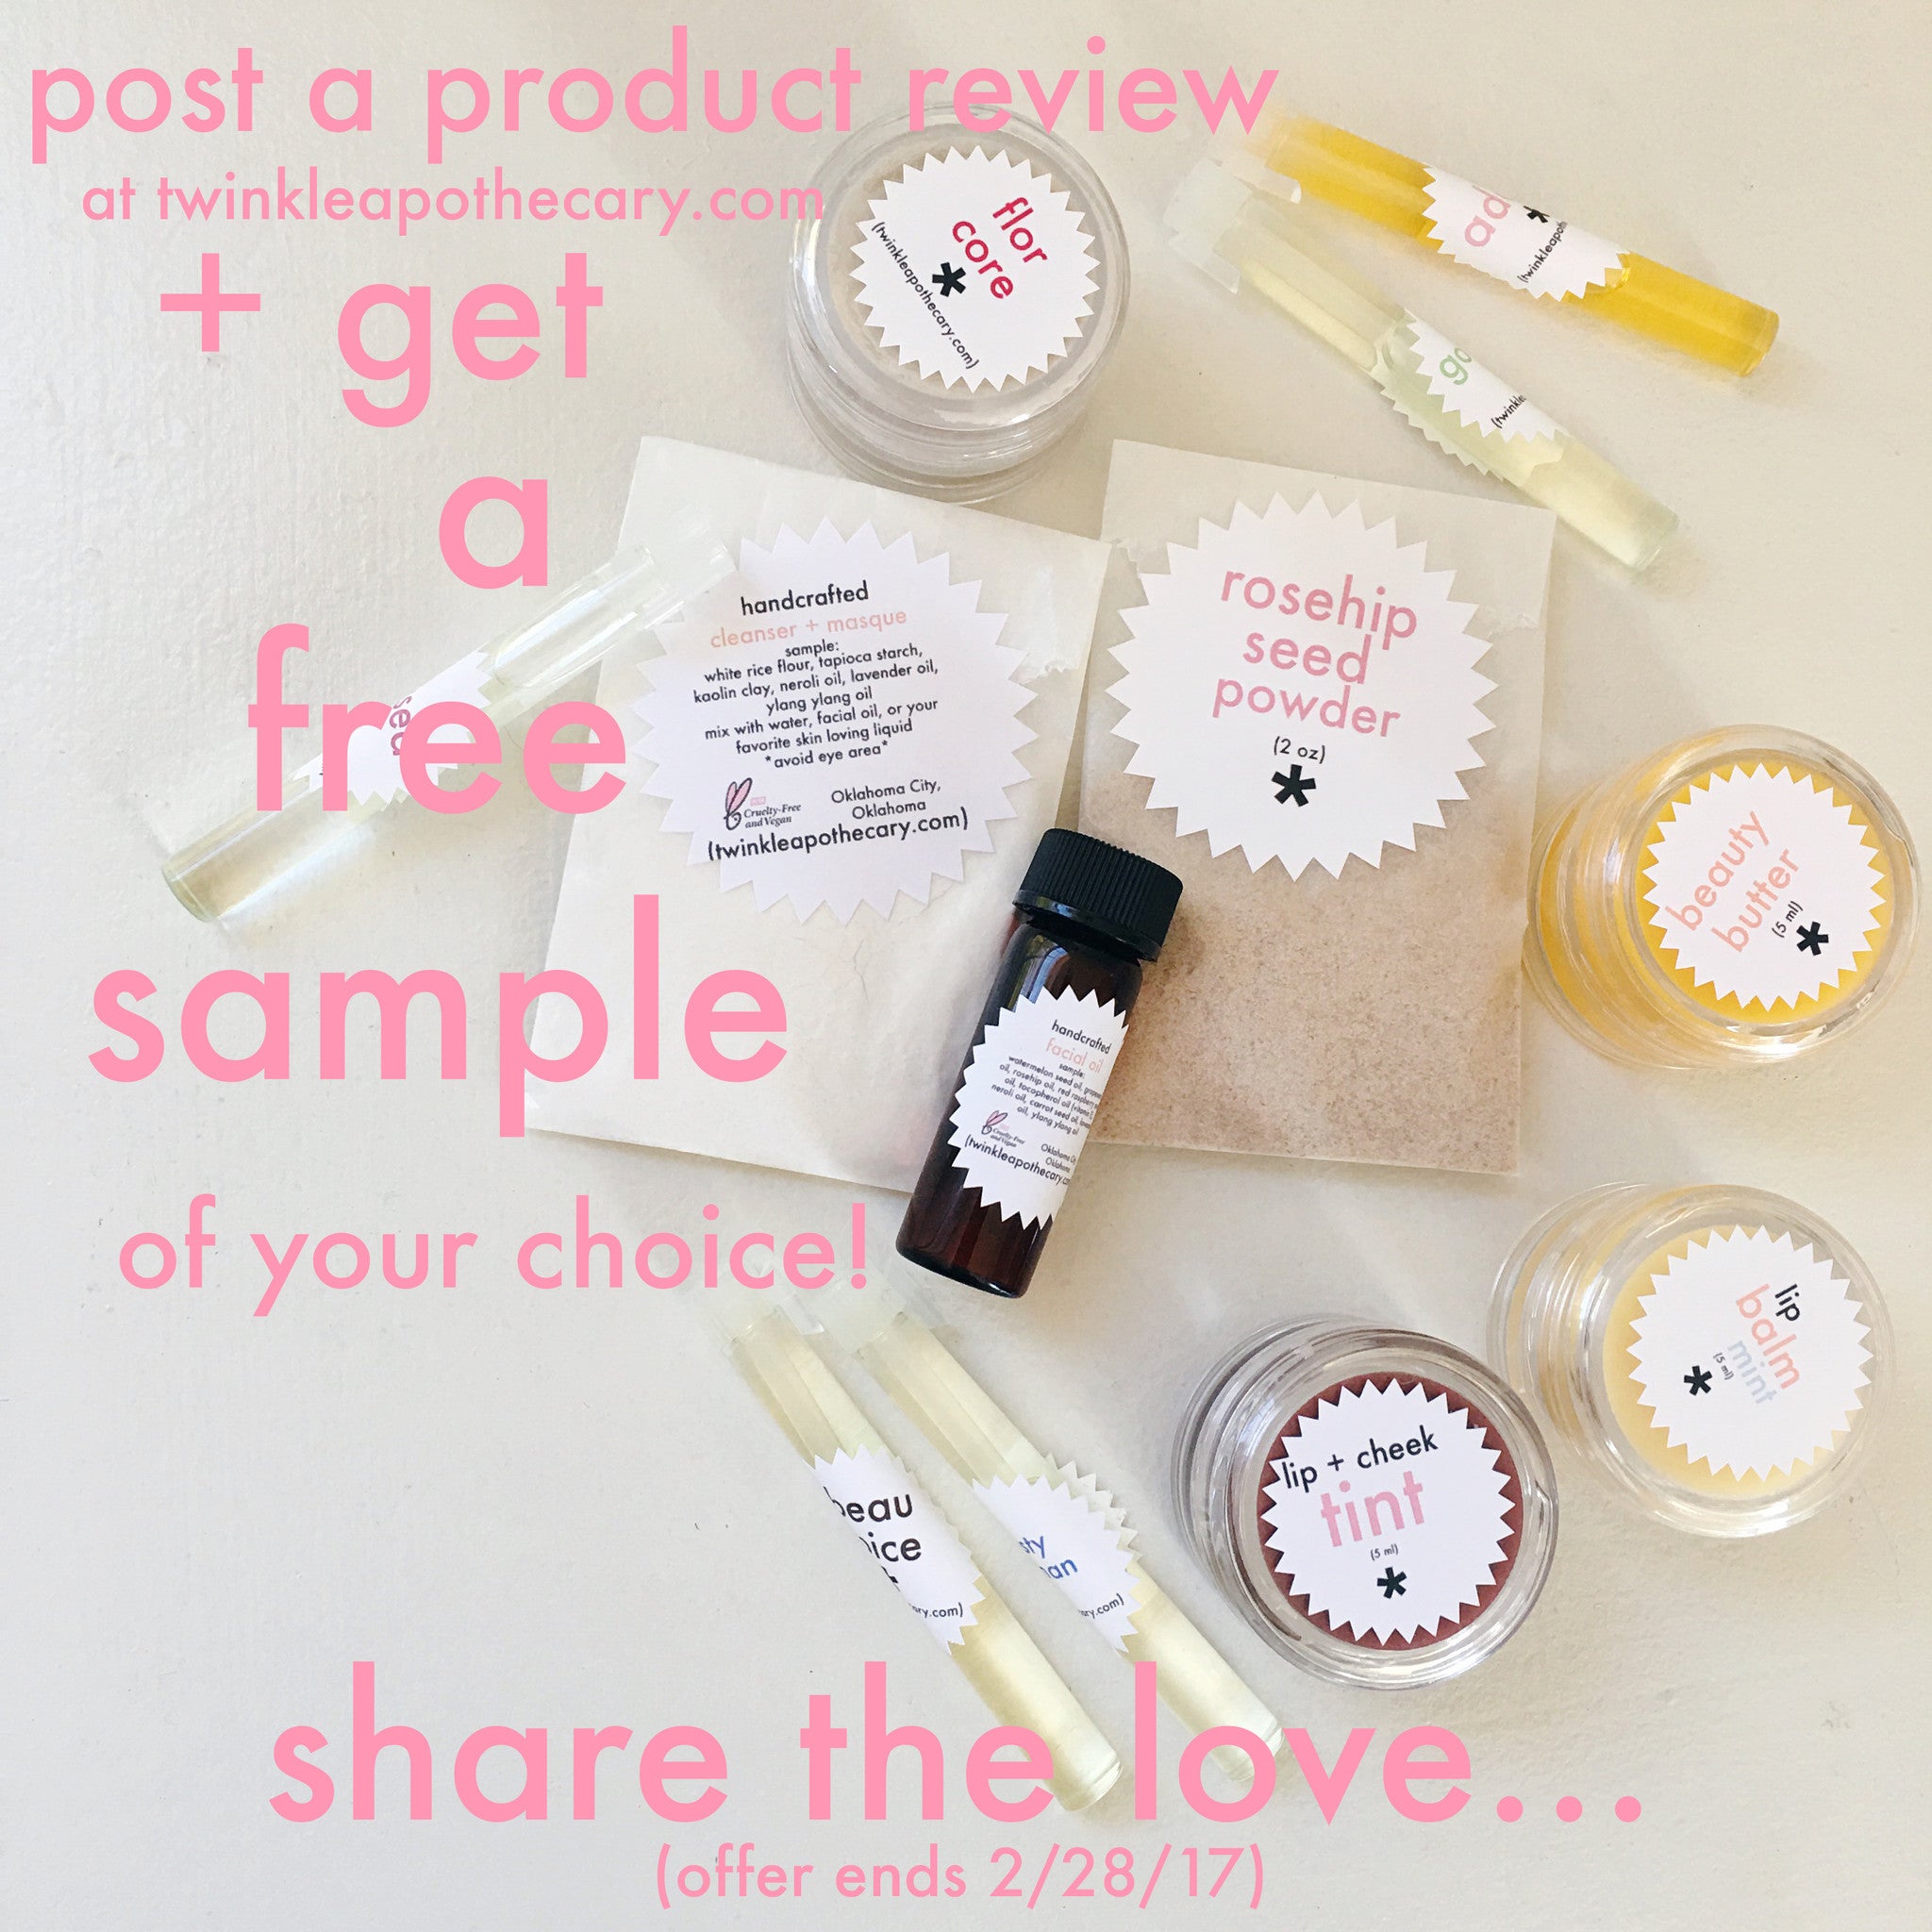 Share the love promotion